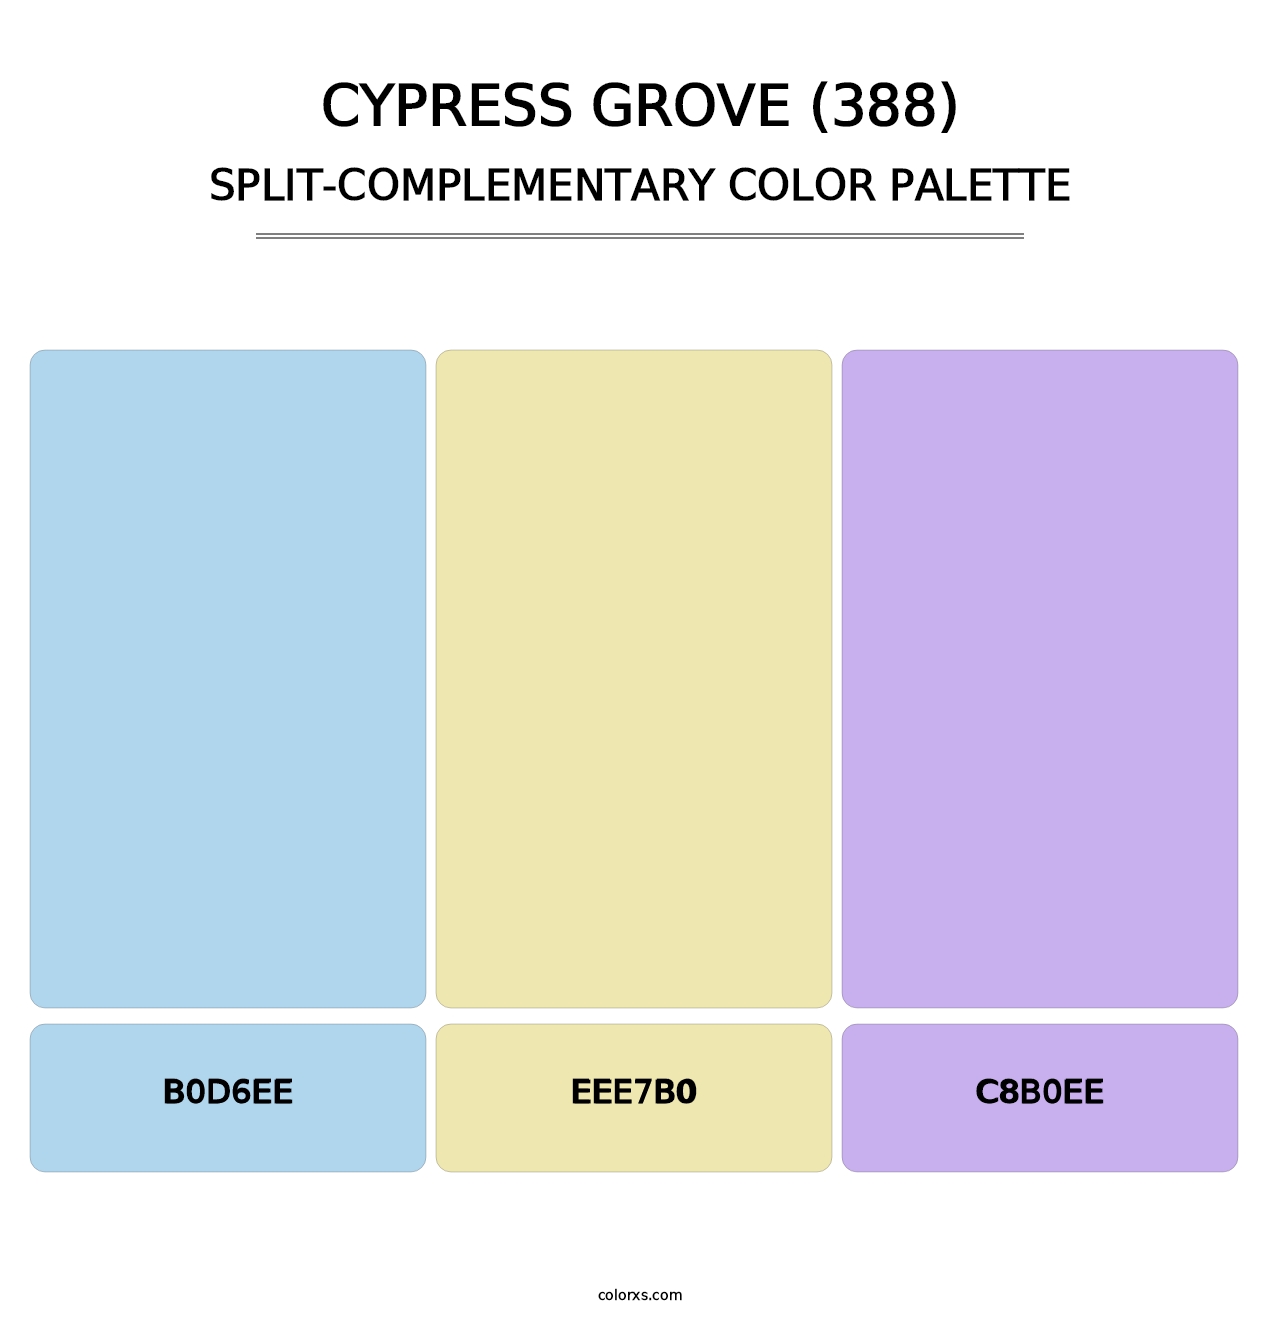 Cypress Grove (388) - Split-Complementary Color Palette